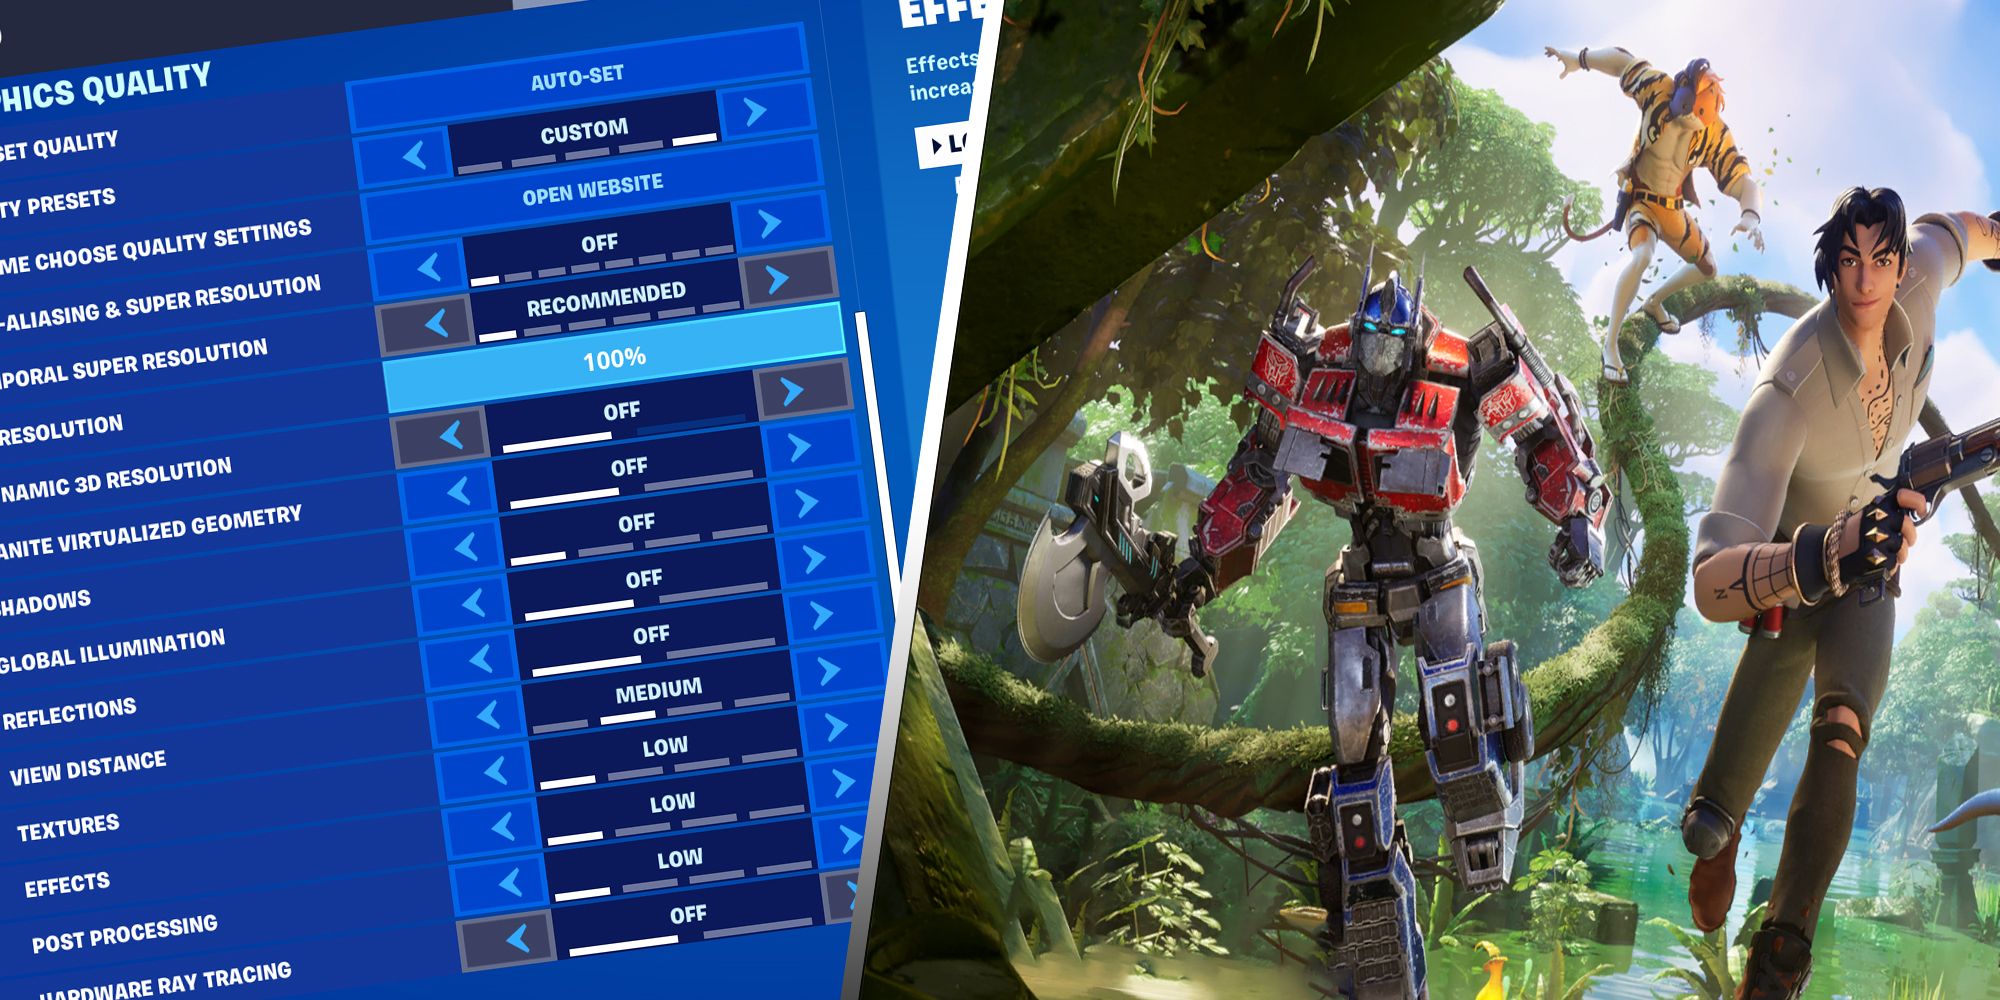 A split image showing the graphic quality settings on the left and a promotional art showing Optimus Prime and other characters on the right.